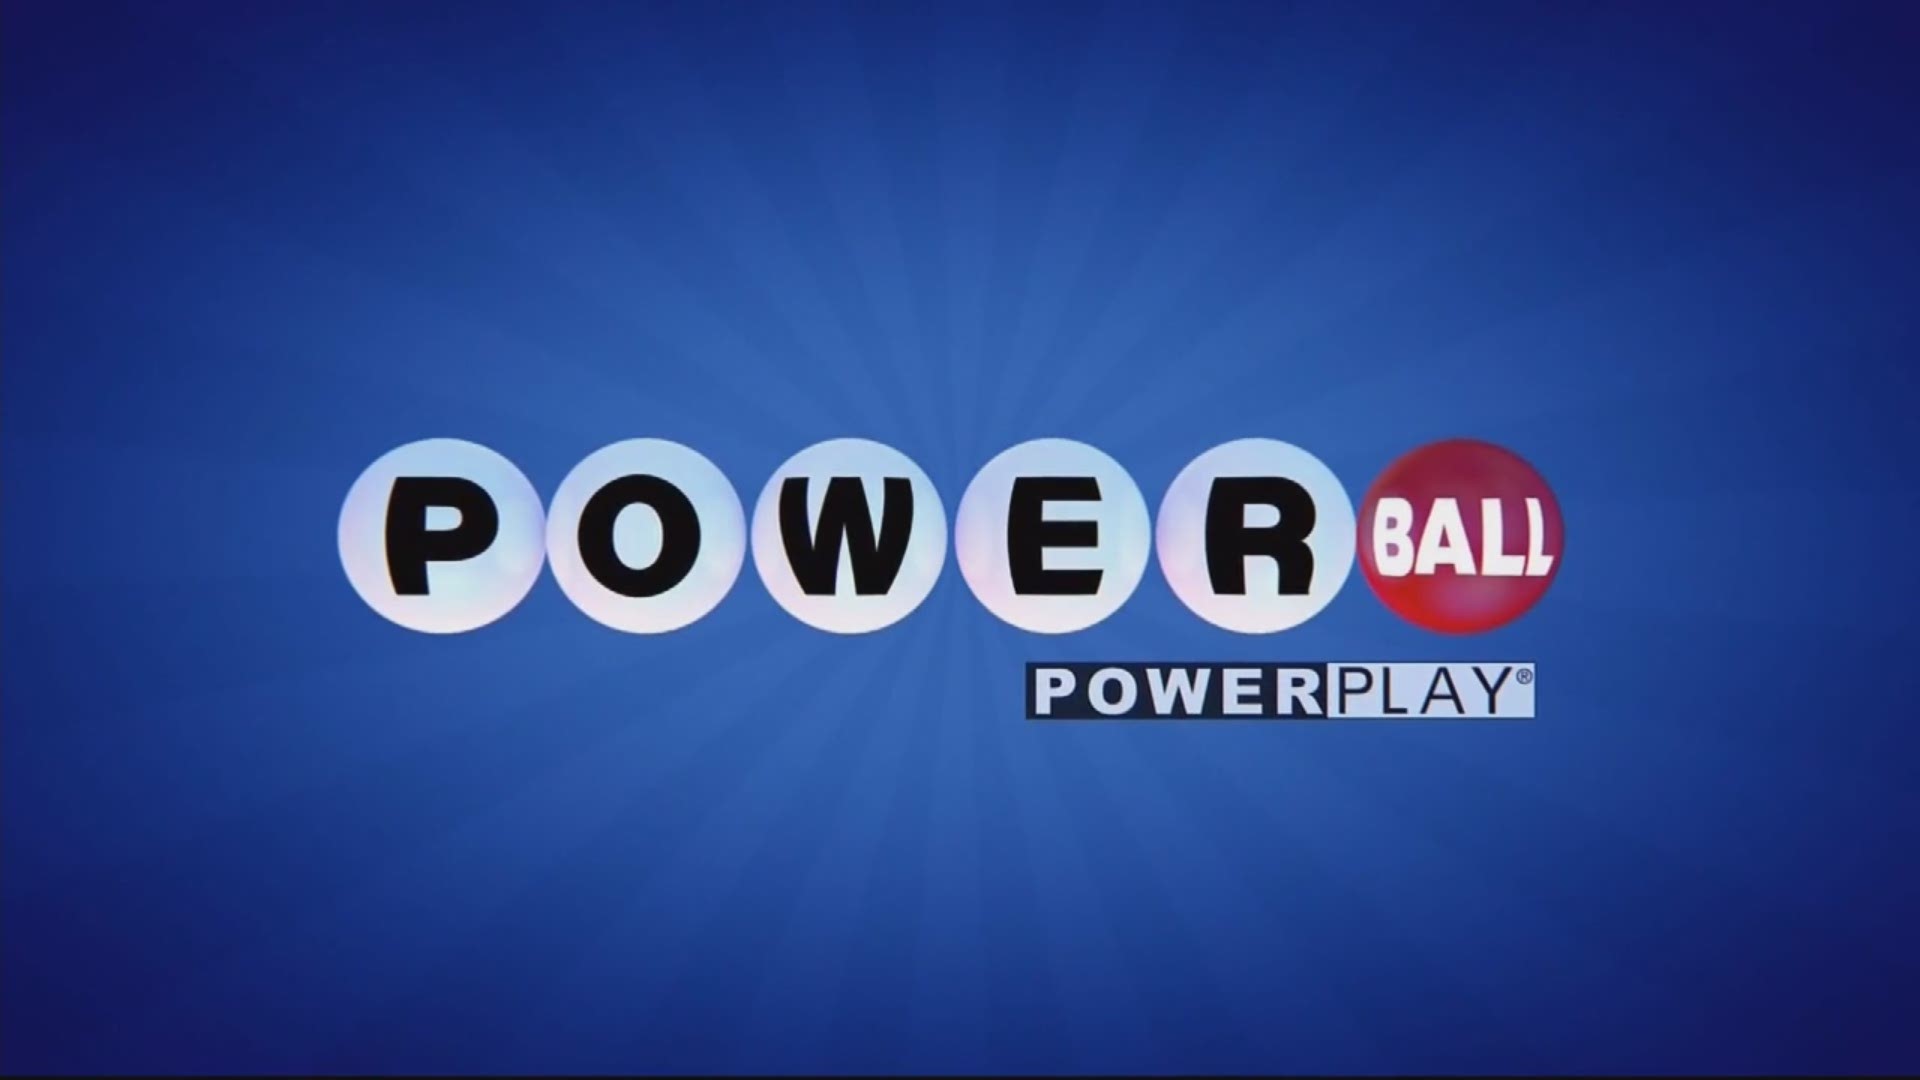 Someone in South Carolina is $150,000 richer after a win in the Powerball drawing on Saturday, February 22, 2020.